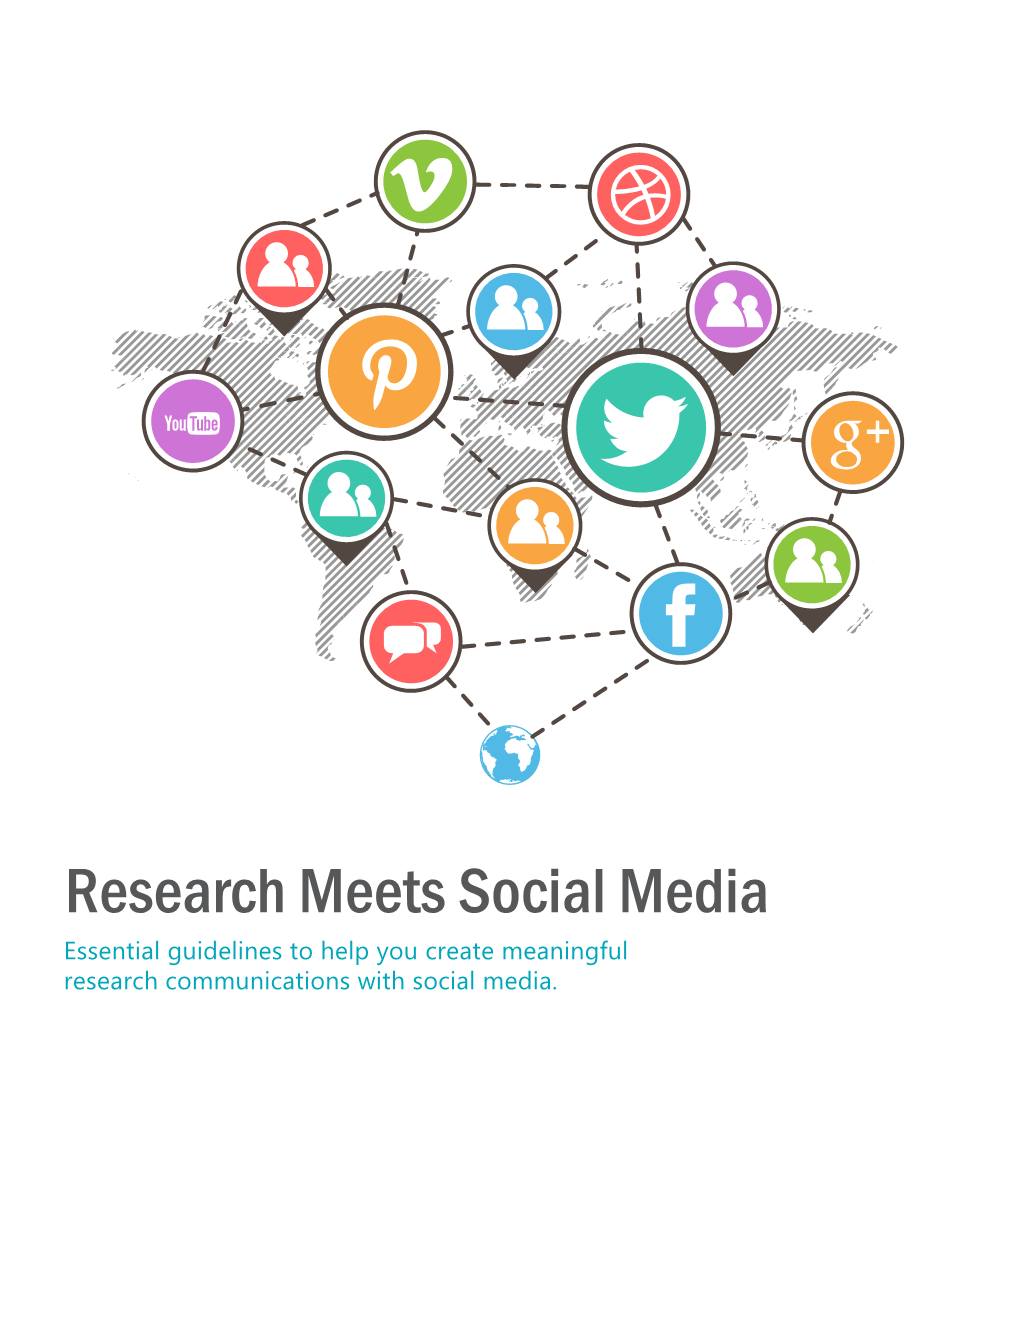 Research Meets Social Media Essential Guidelines to Help You Create Meaningful Research Communications with Social Media